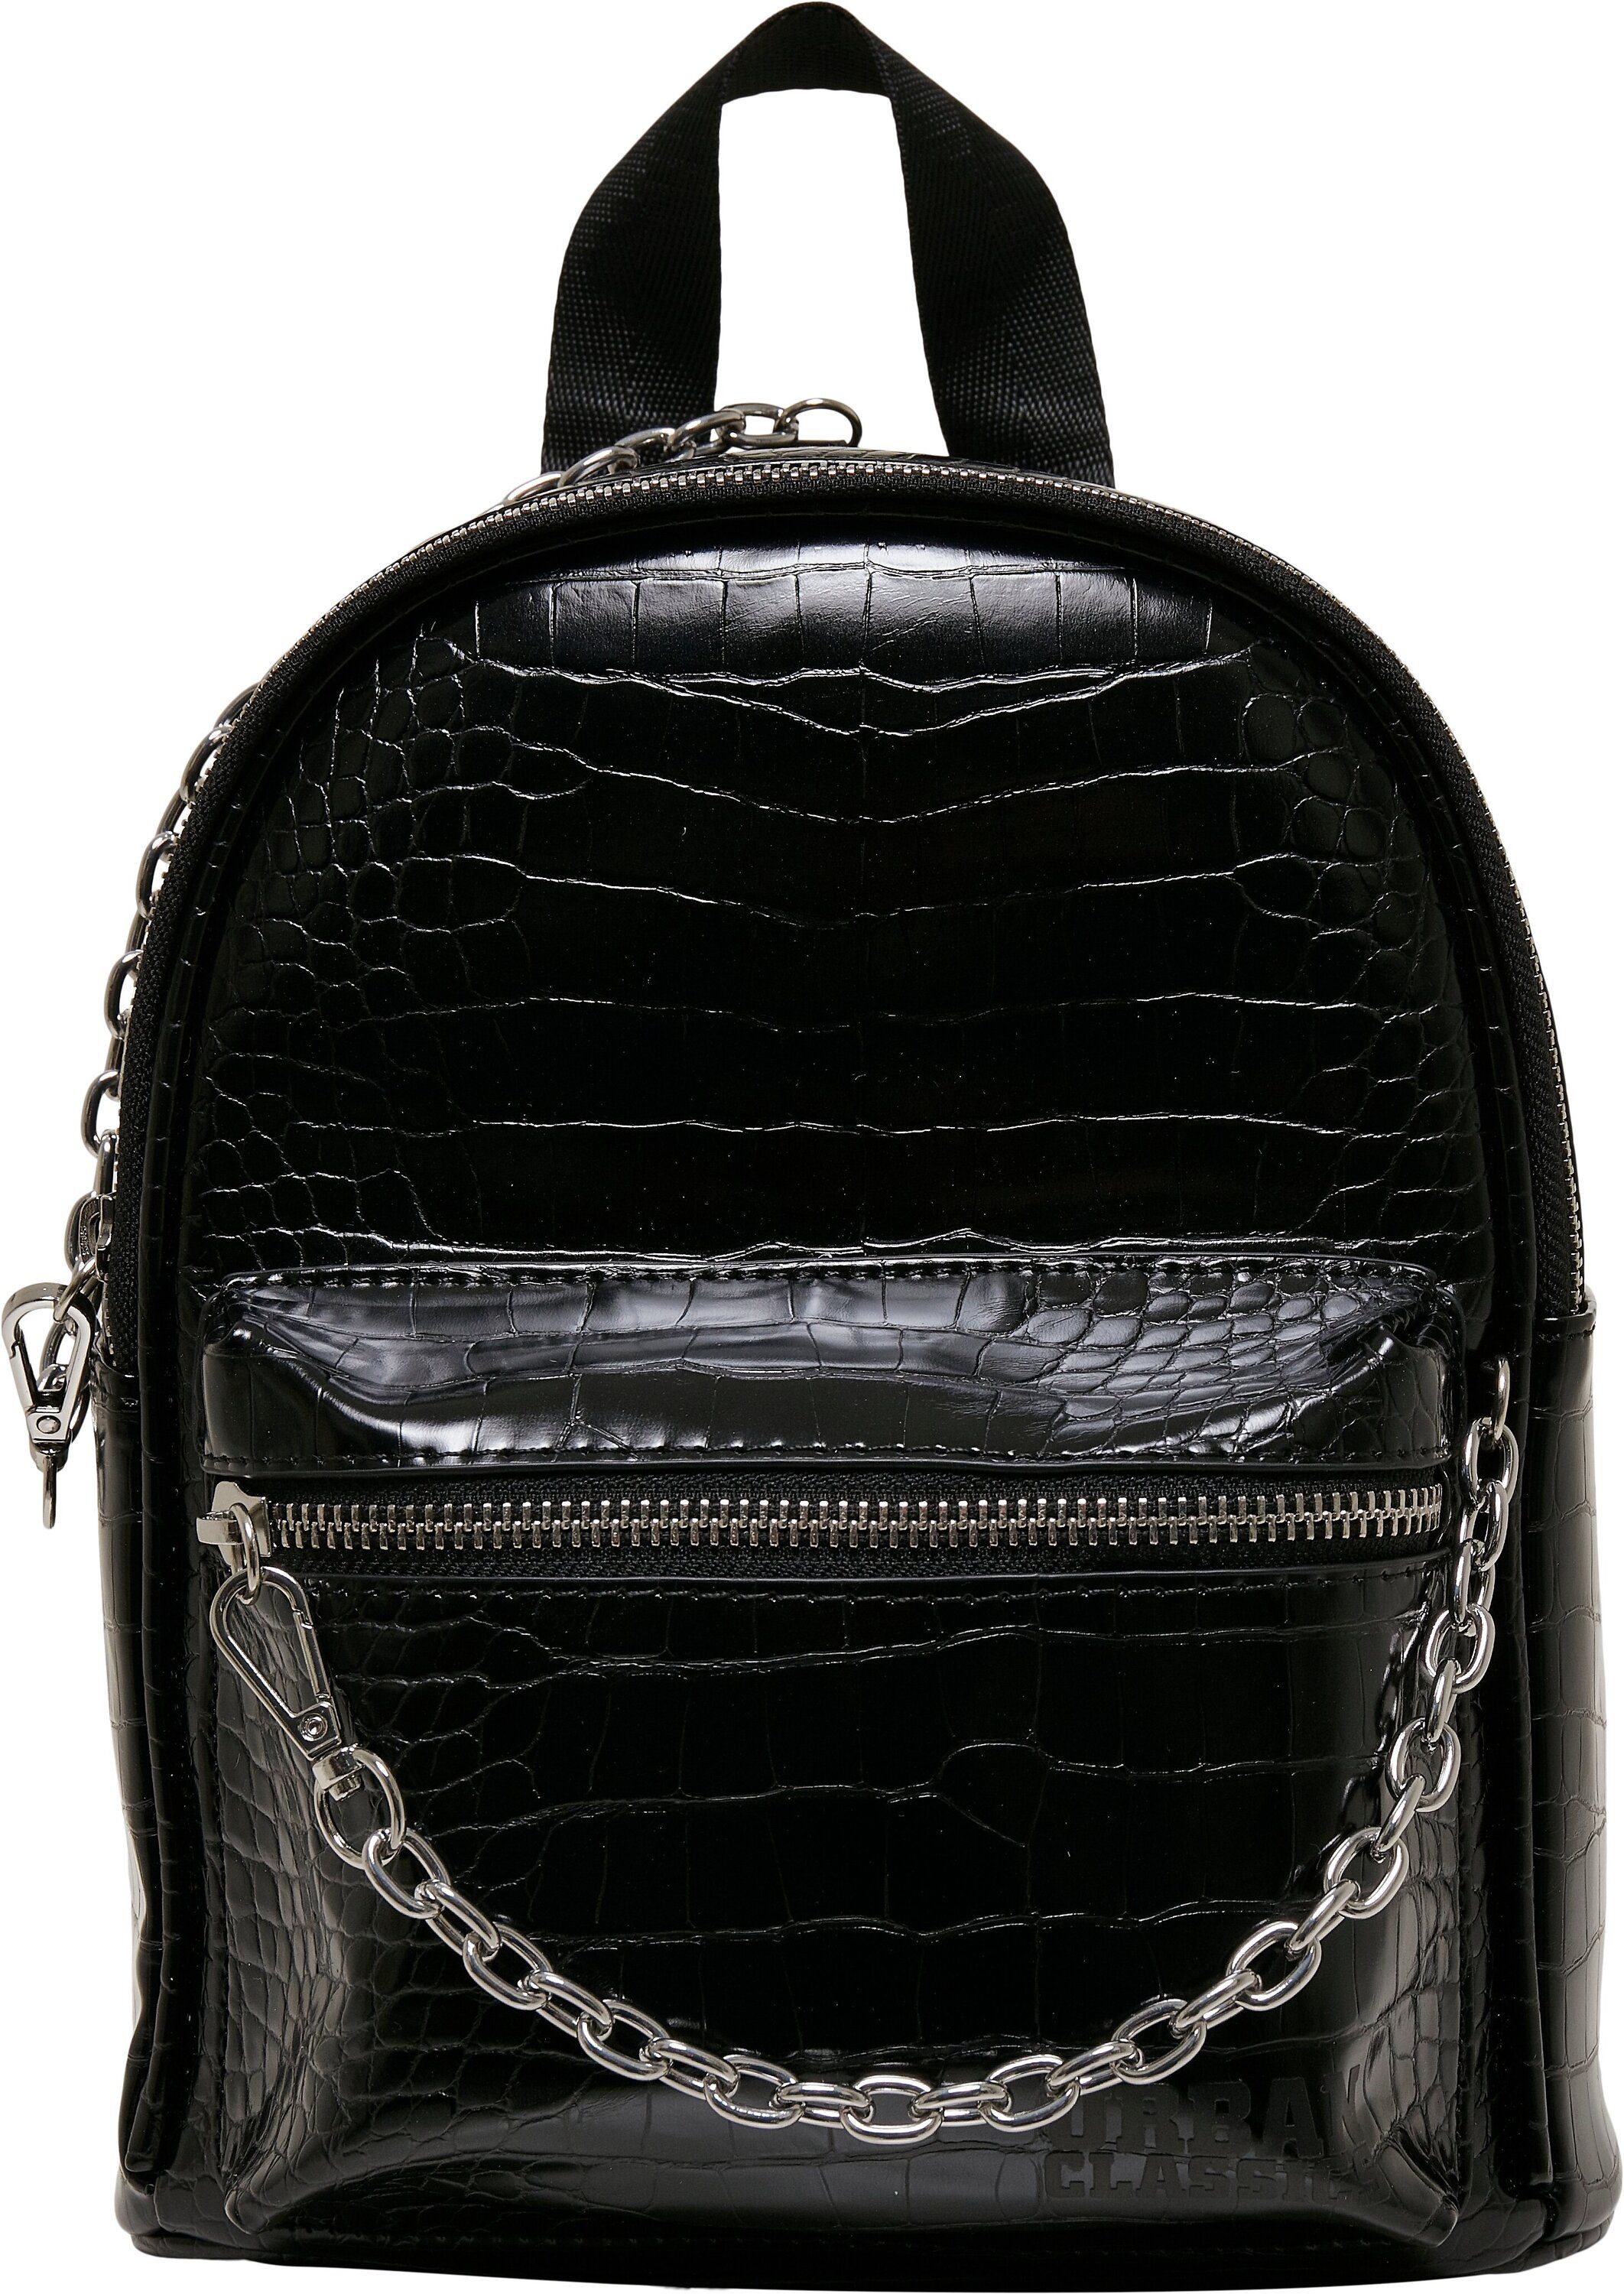 URBAN CLASSICS Rucksack Unisex Croco Synthetic Leather Backpack